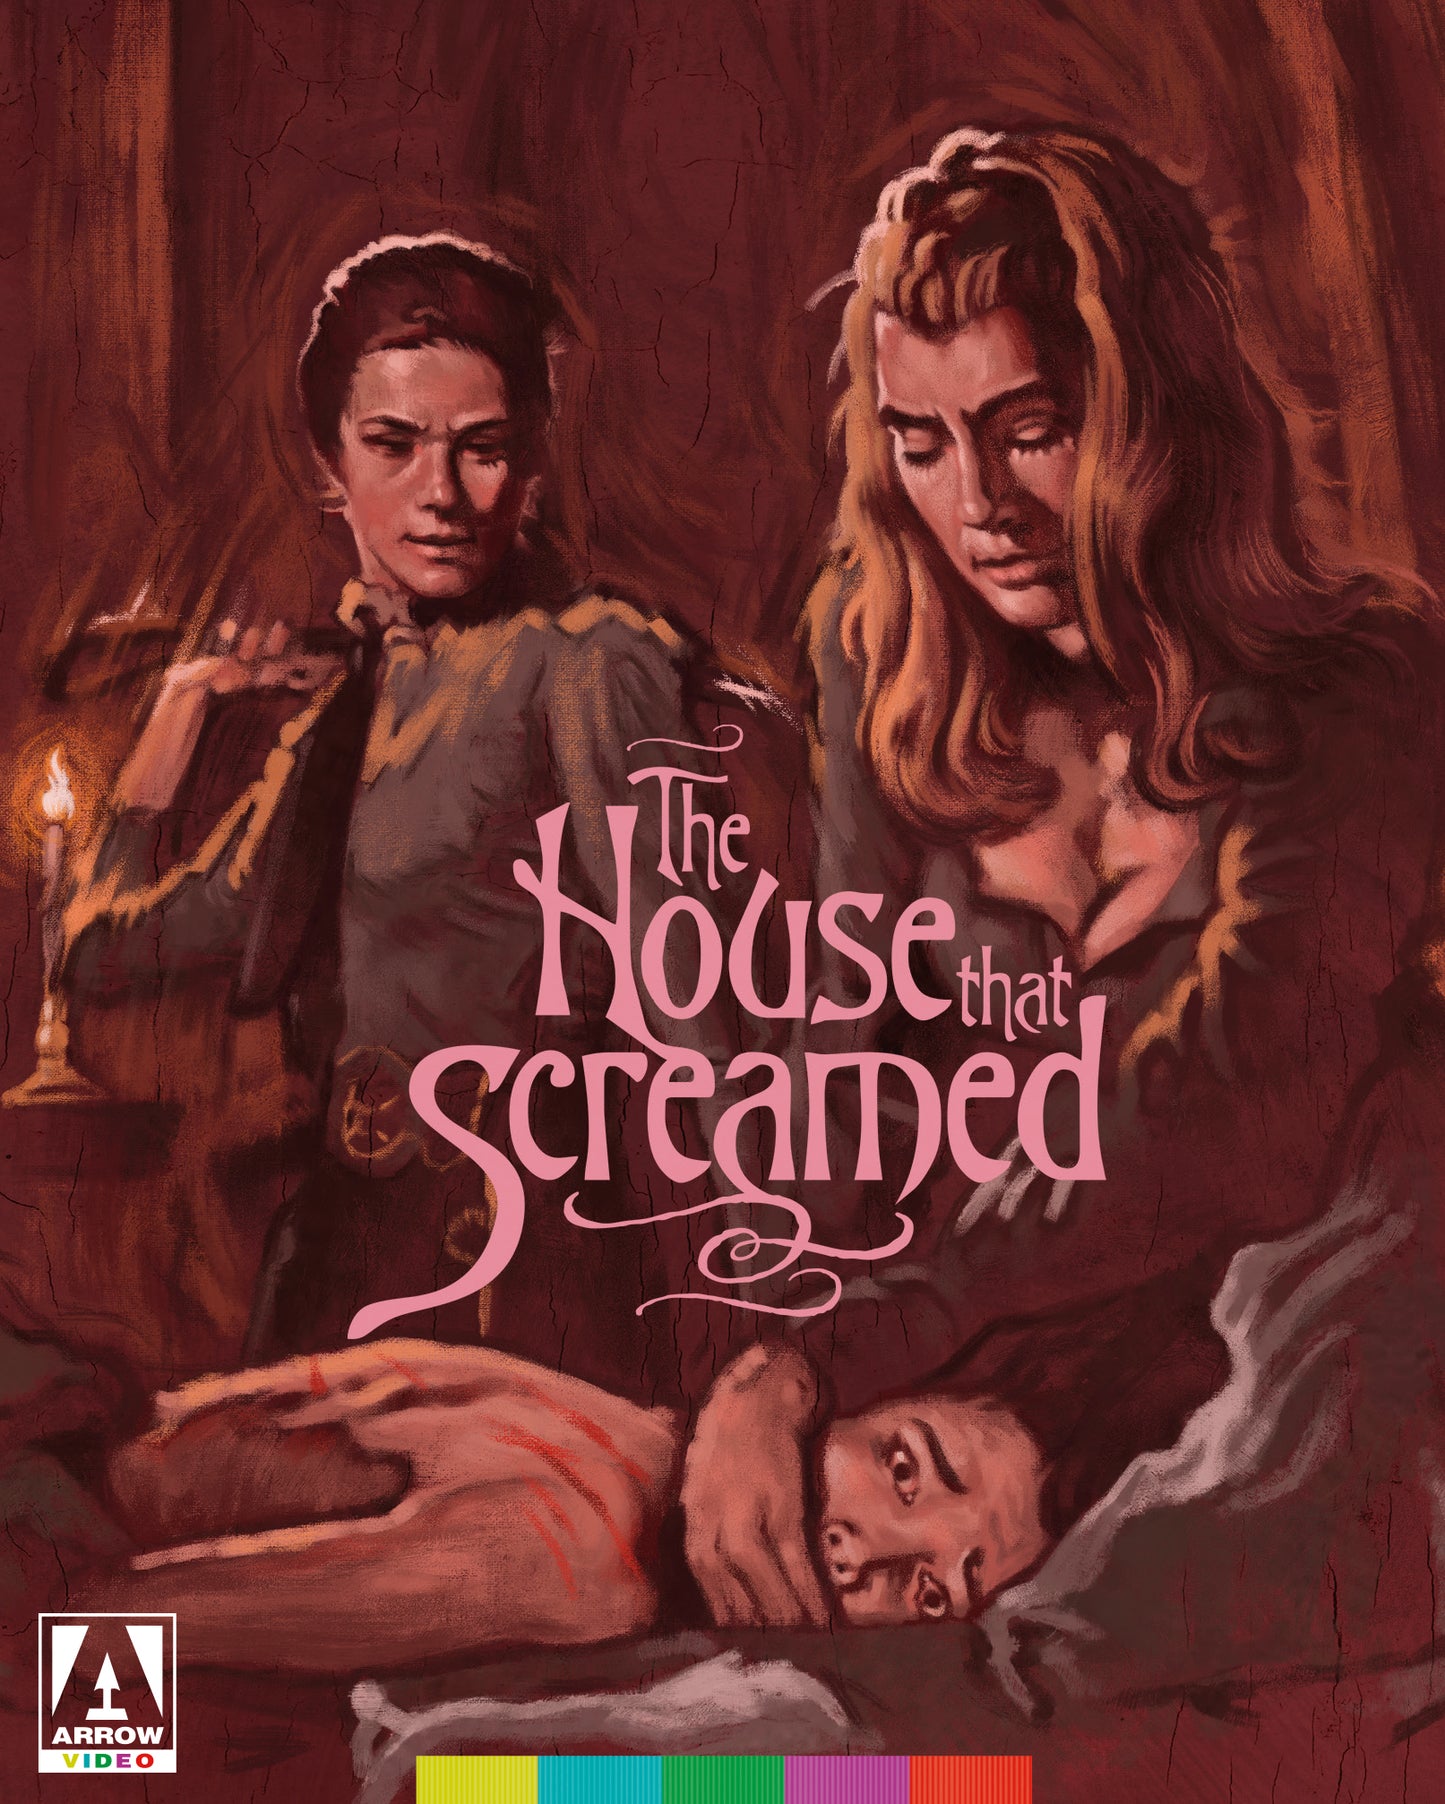 The House That Screamed Limited Edition Arrow Video Blu-Ray [NEW] [SLIPCOVER]